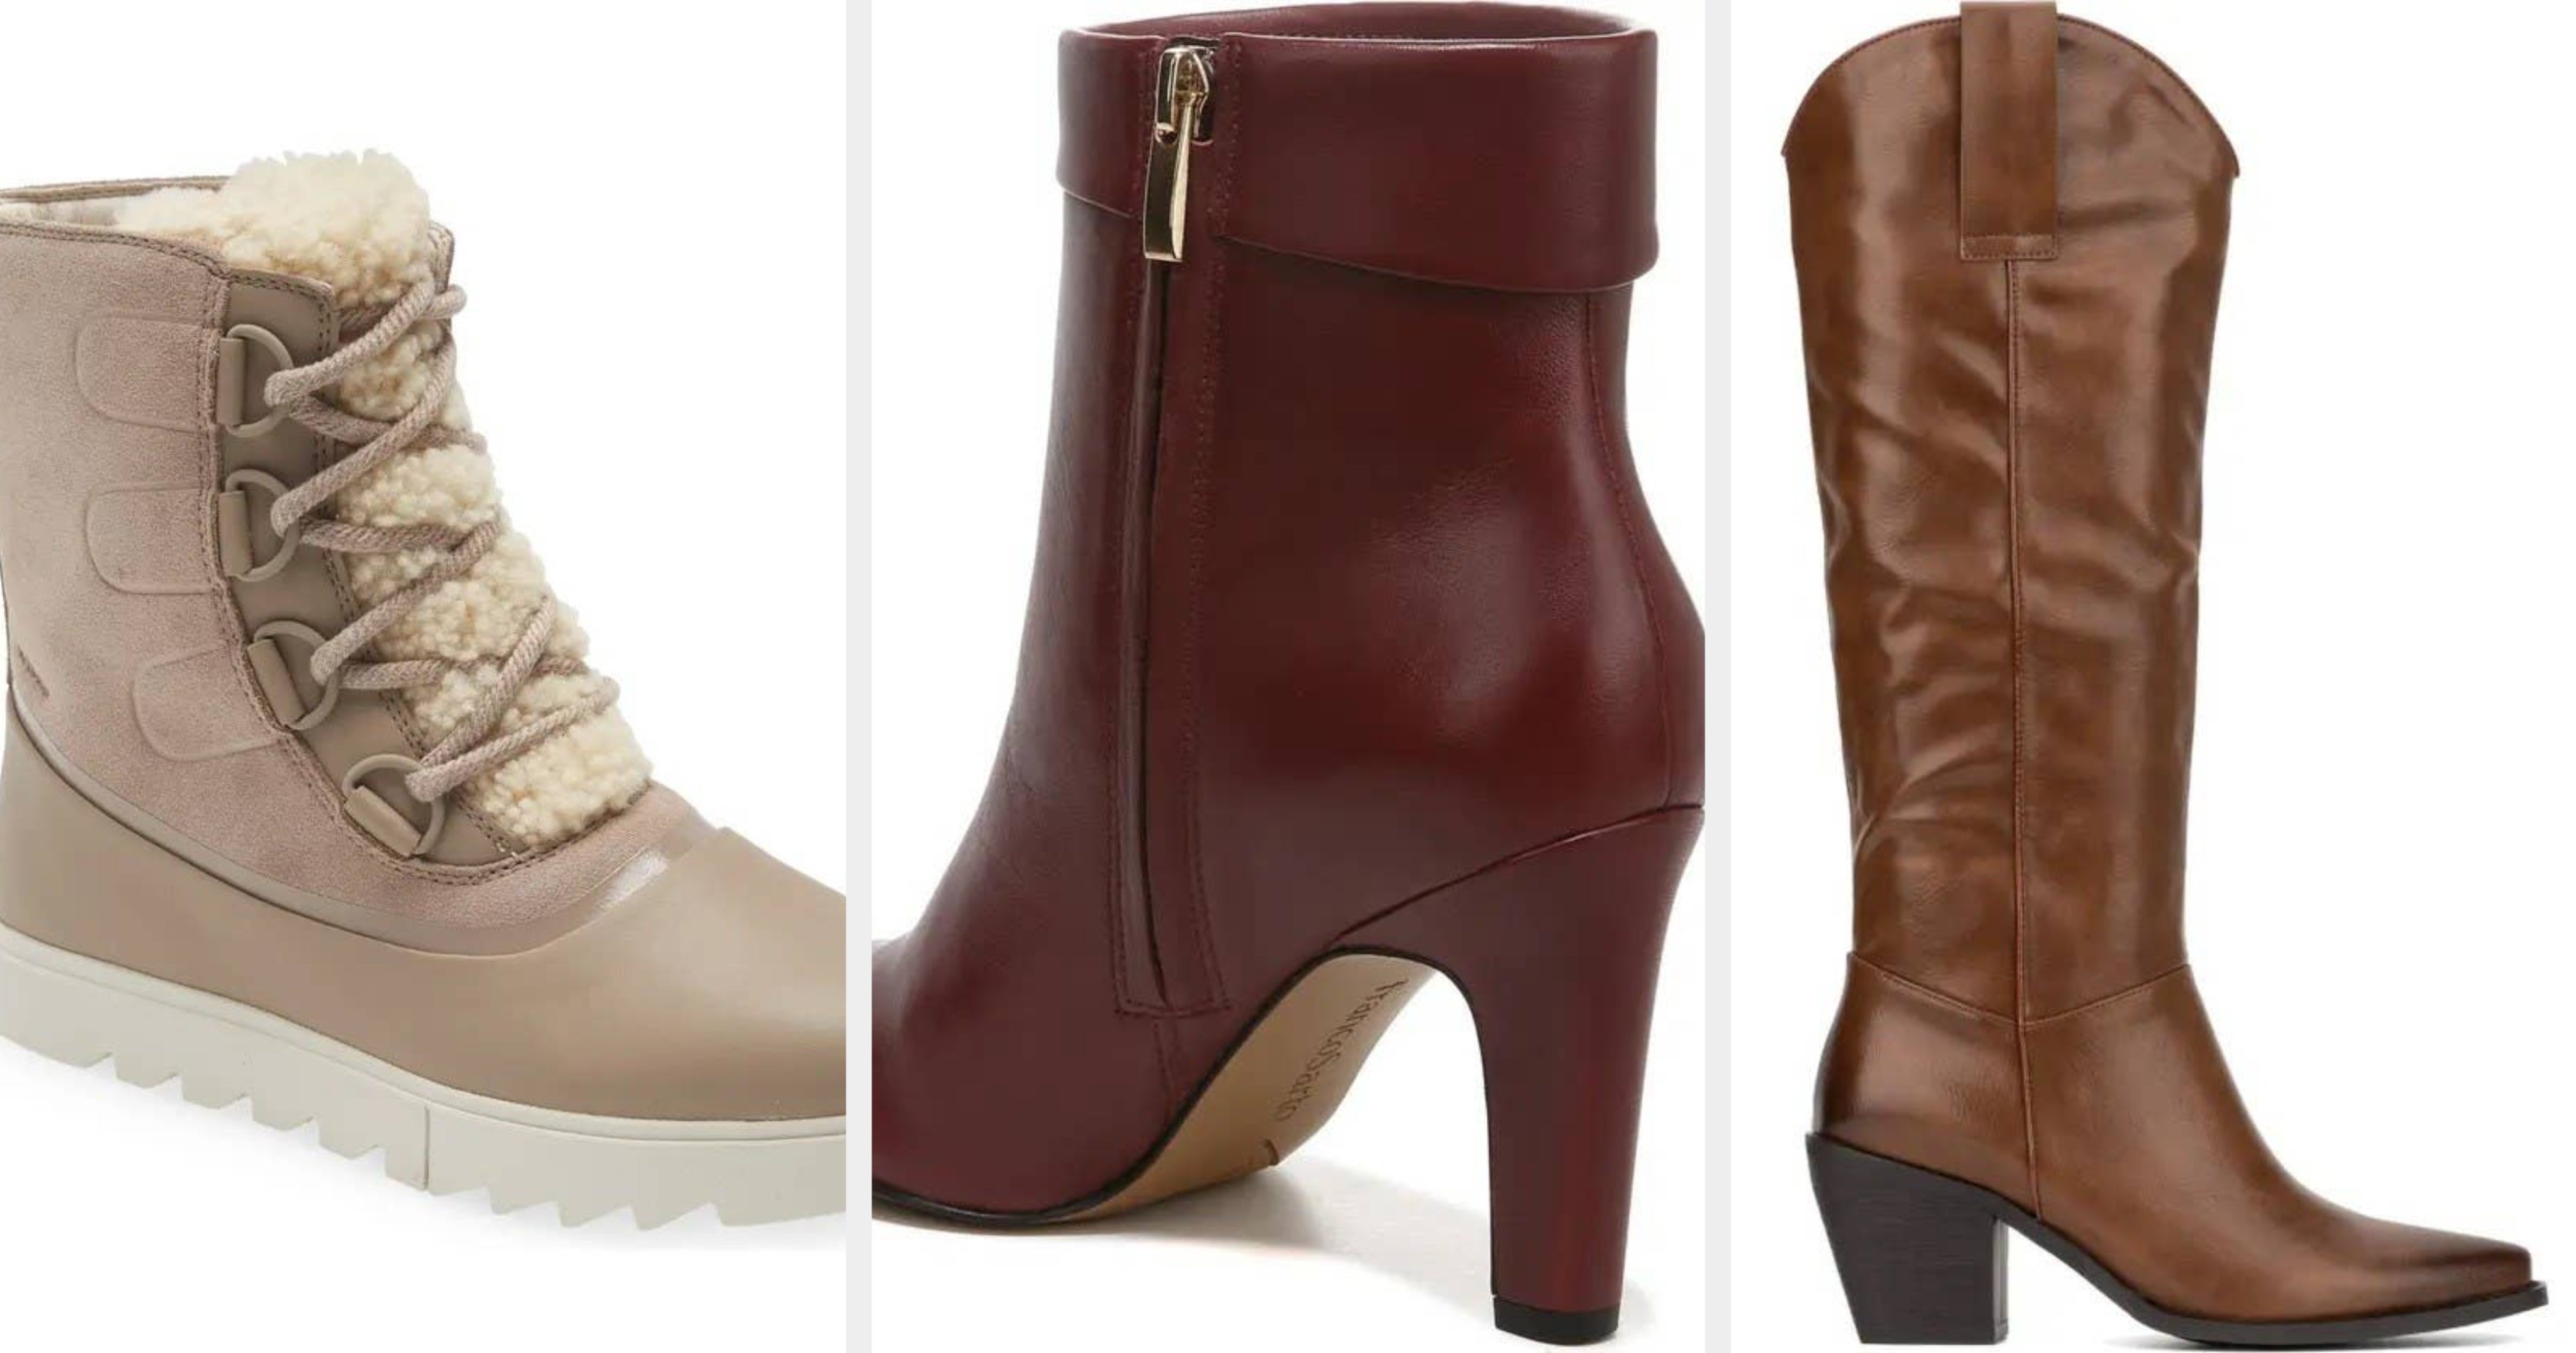 15 Pairs Of Cool Comfy Boots From Nordstrom Rack You Won't Stop Wearing